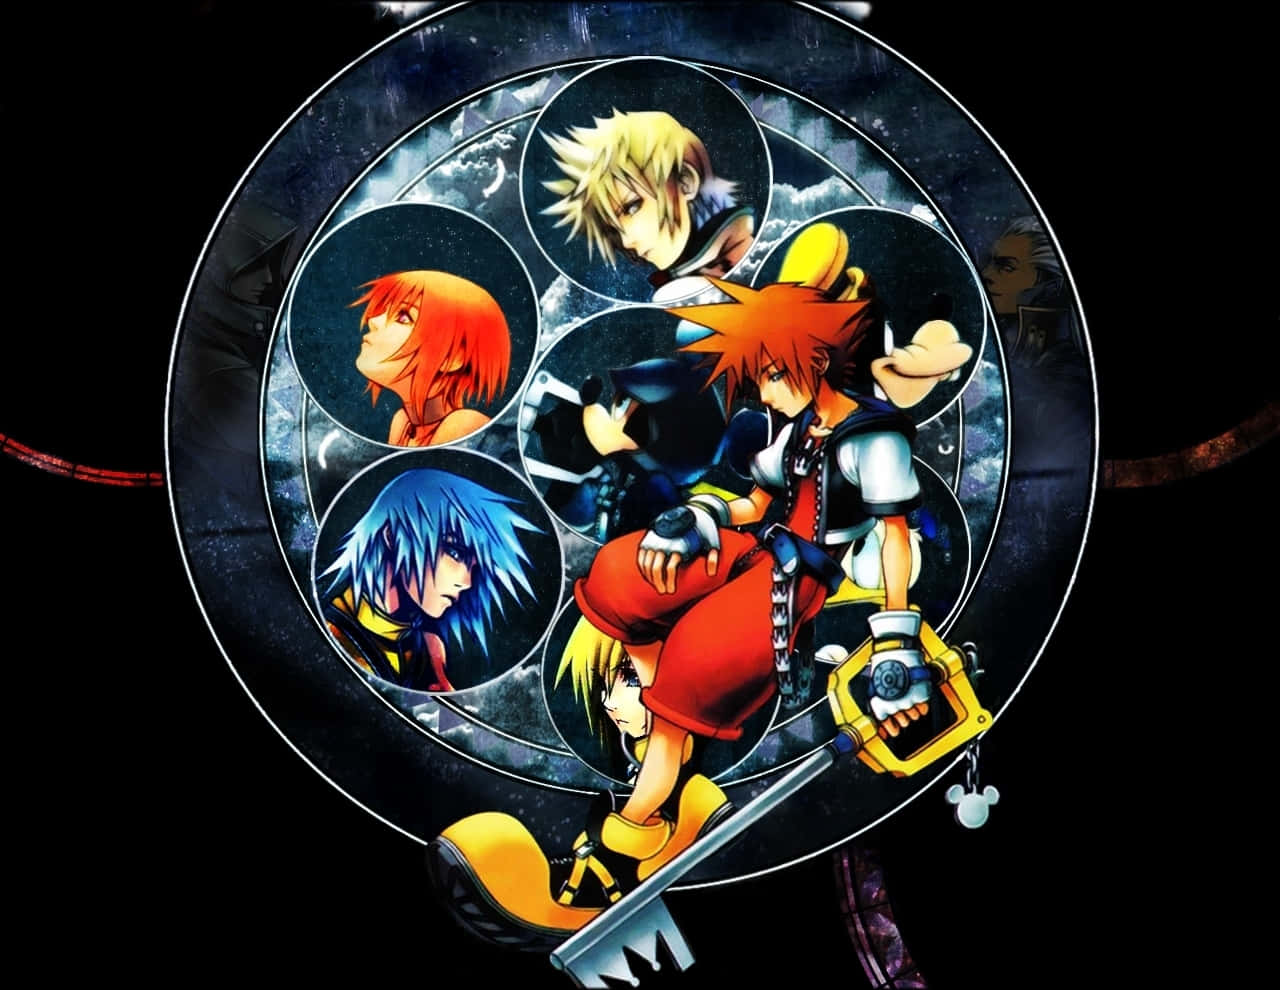 Sora, Donald, and Goofy embark on a magical journey in Kingdom Hearts.